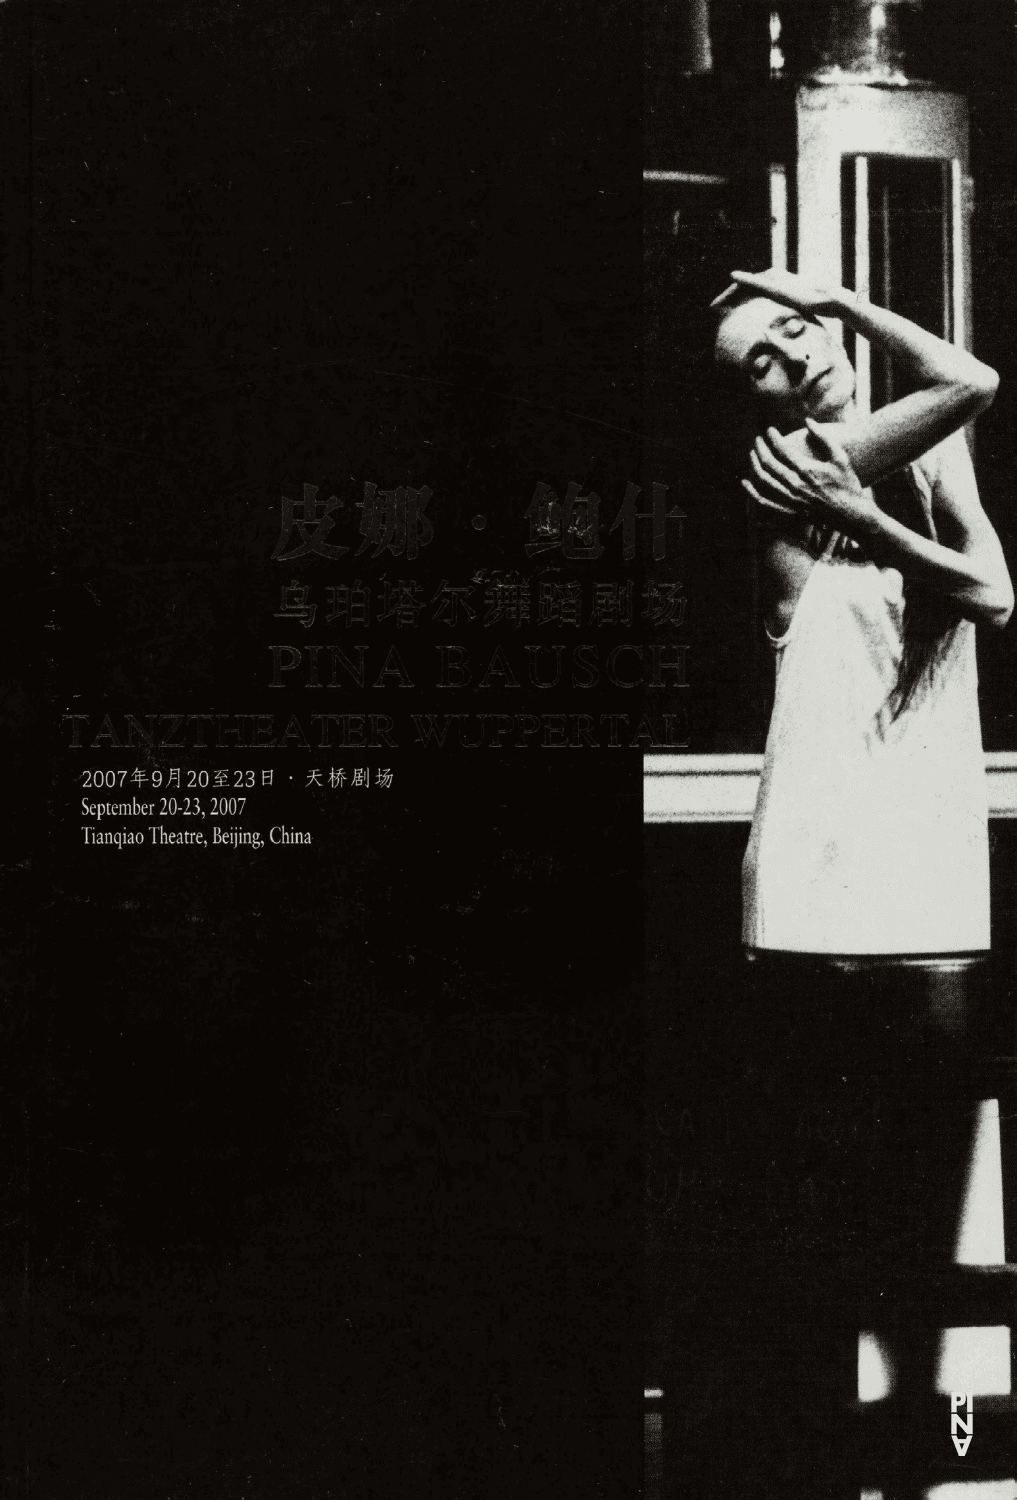 Booklet for “Café Müller” and “The Rite of Spring” by Pina Bausch with Tanztheater Wuppertal in in Beijing, 09/20/2007 – 09/23/2007